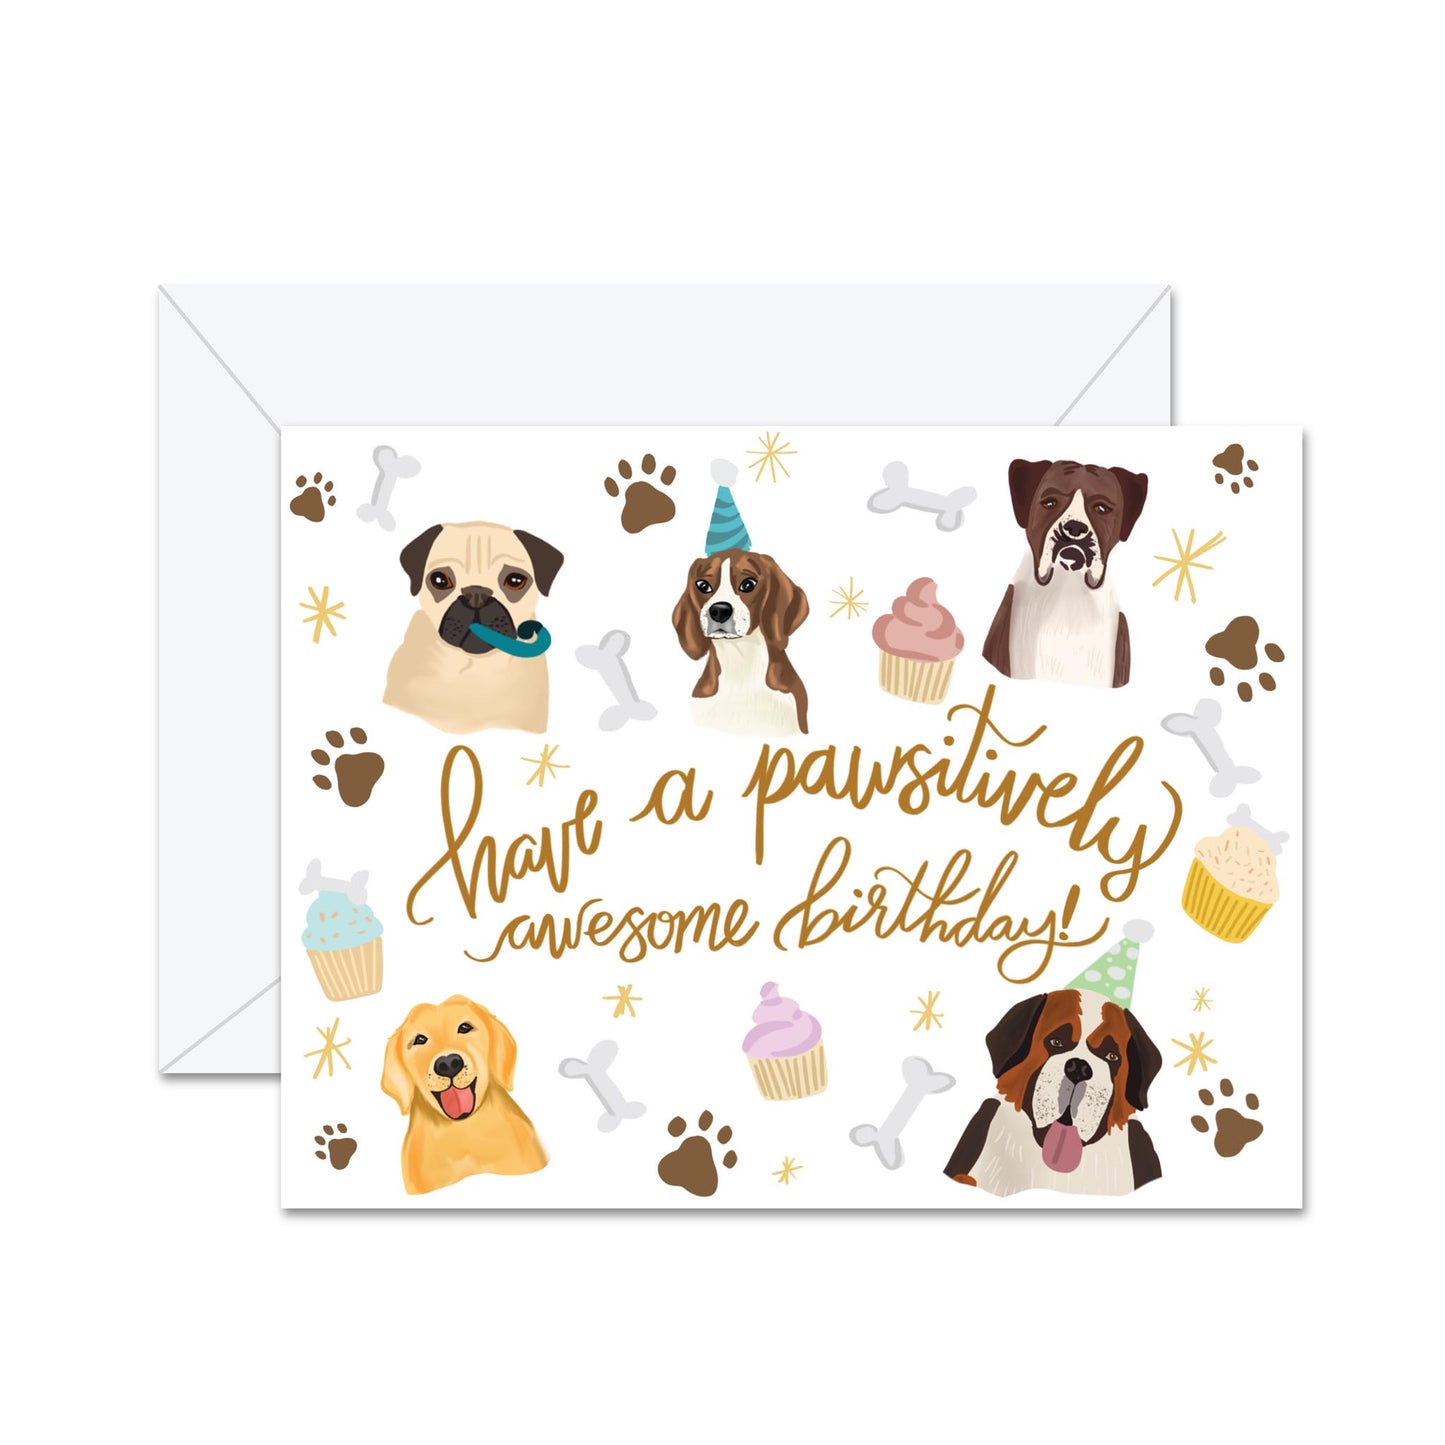 Have A Pawsivitely Awesome Birthday! (Dog) - Greeting Card